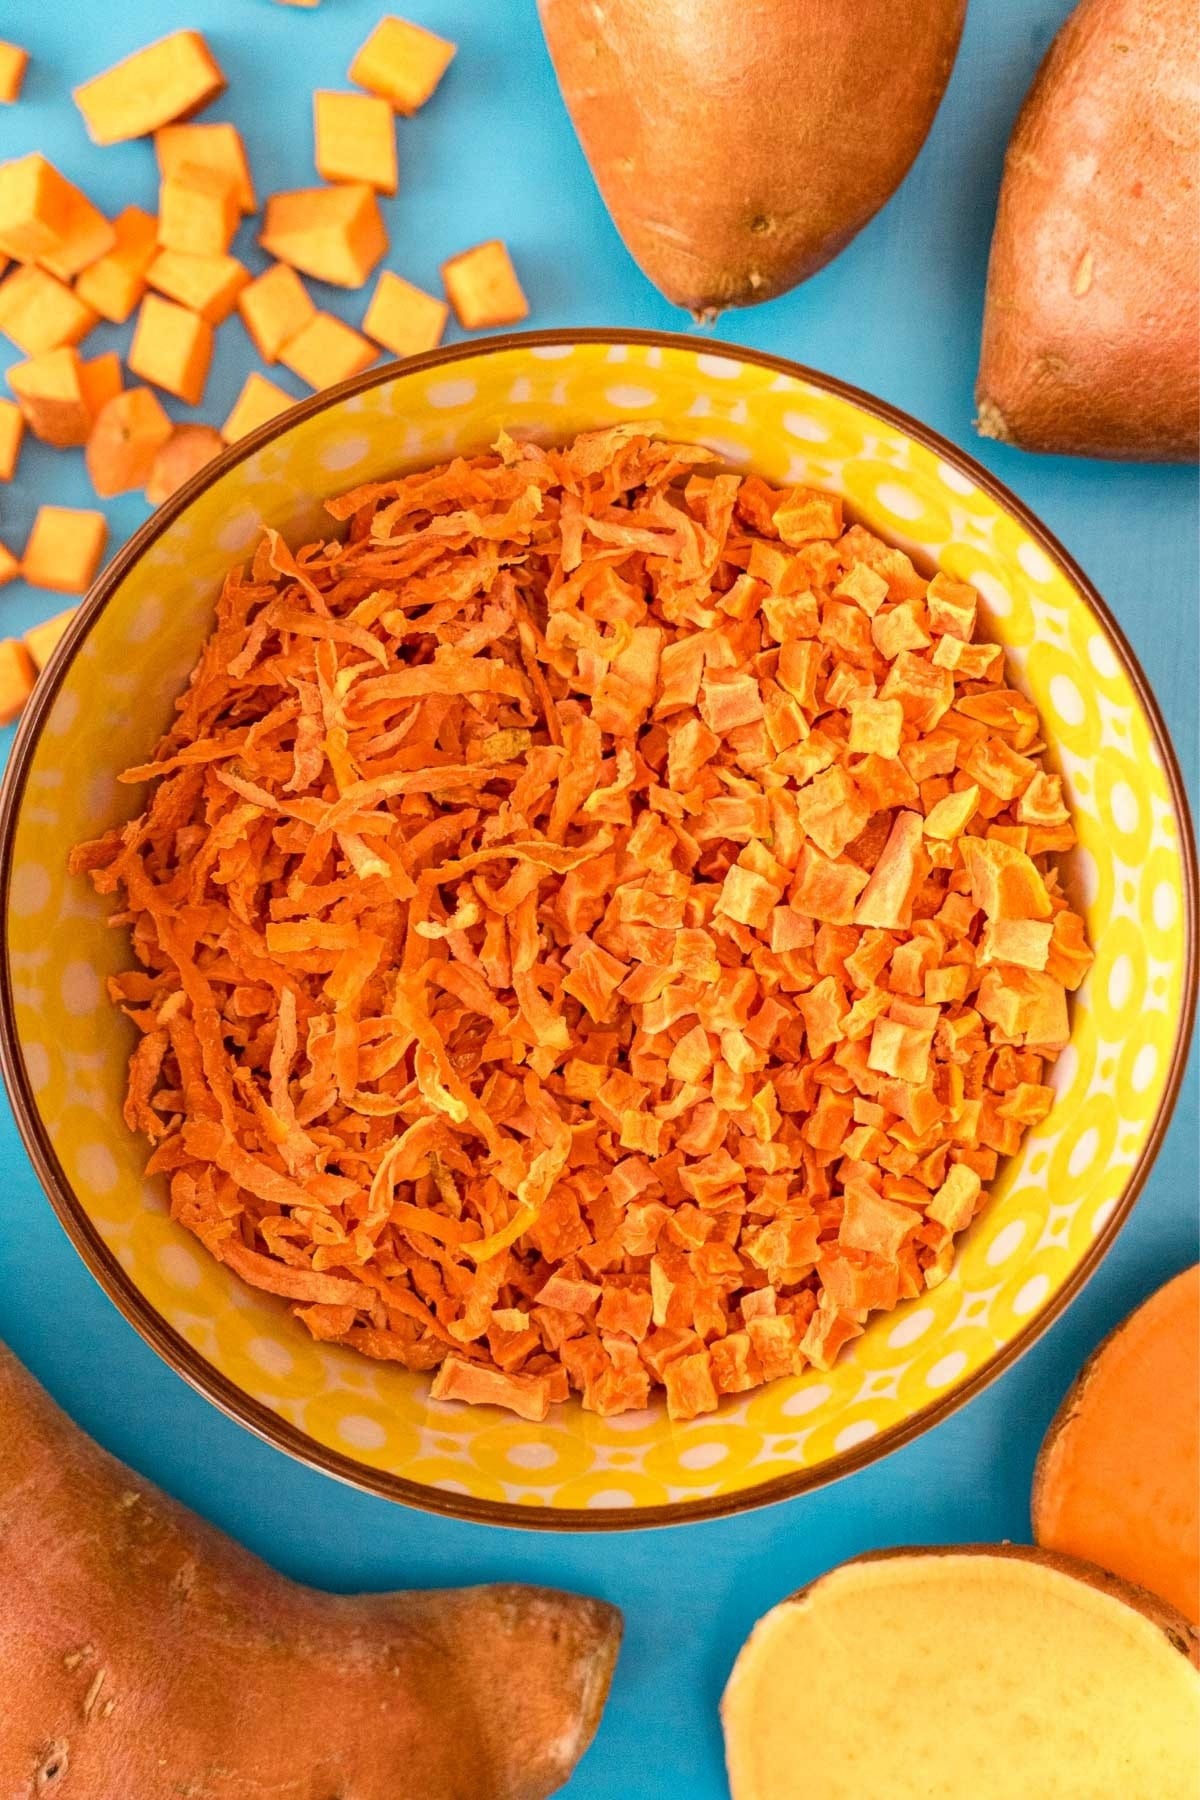 Dehydrated sweet potatoes in a bowl